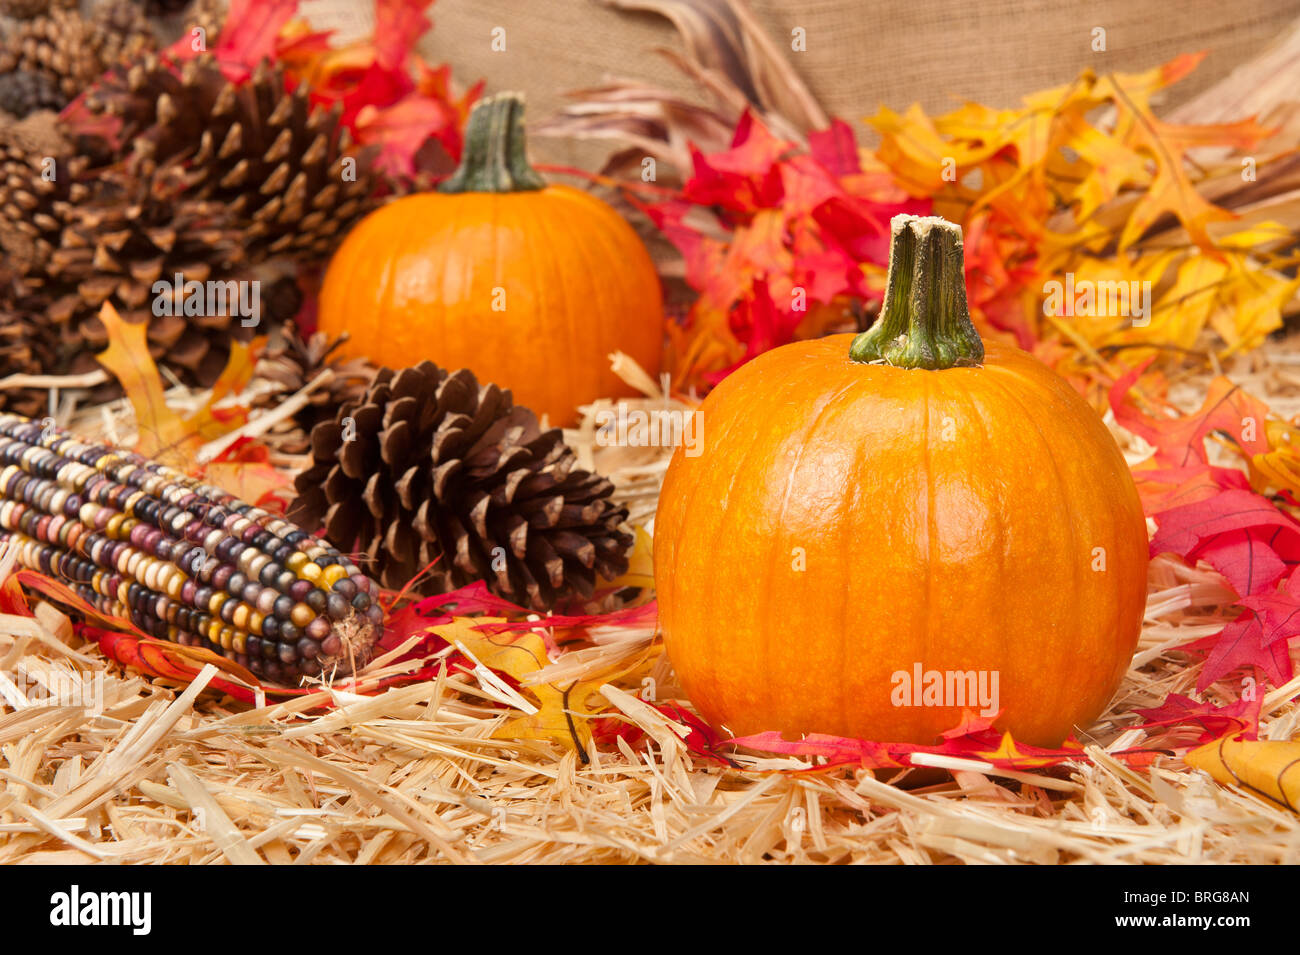 An Autumn holiday theme with pumpkins, corn, pine cones and autumn leaves on a hay base. Stock Photo